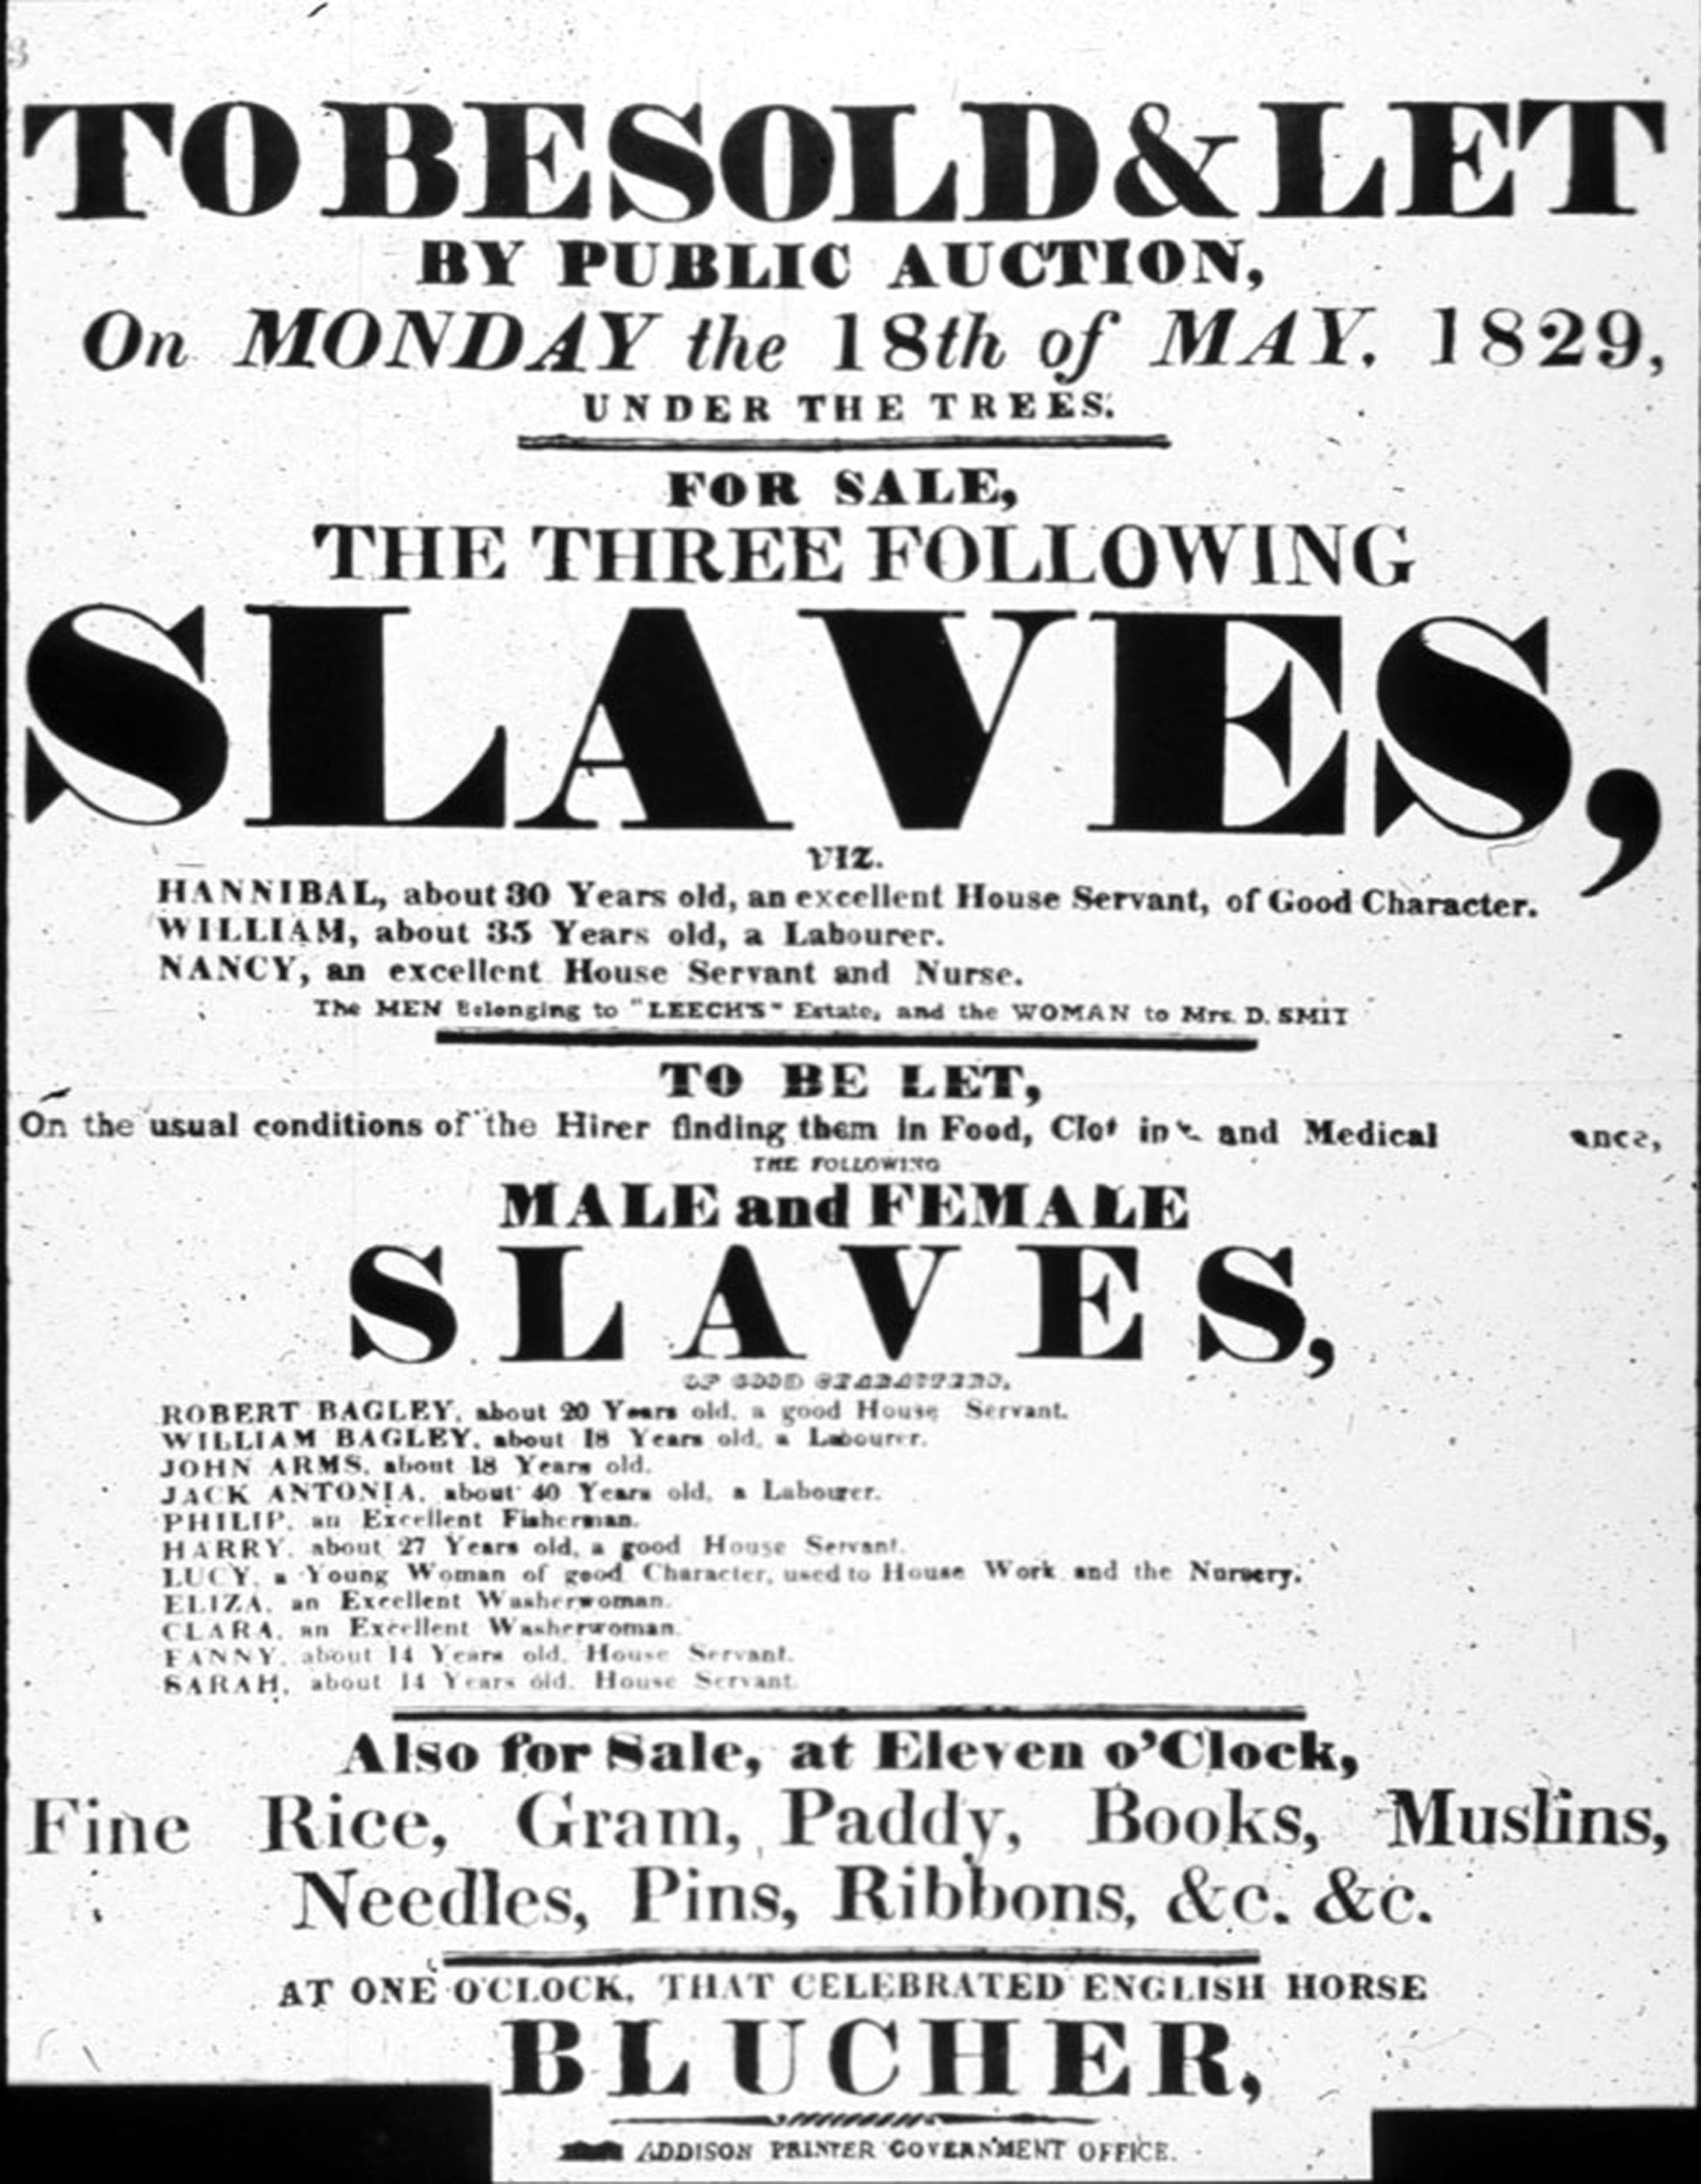 A flyer for buying slaves